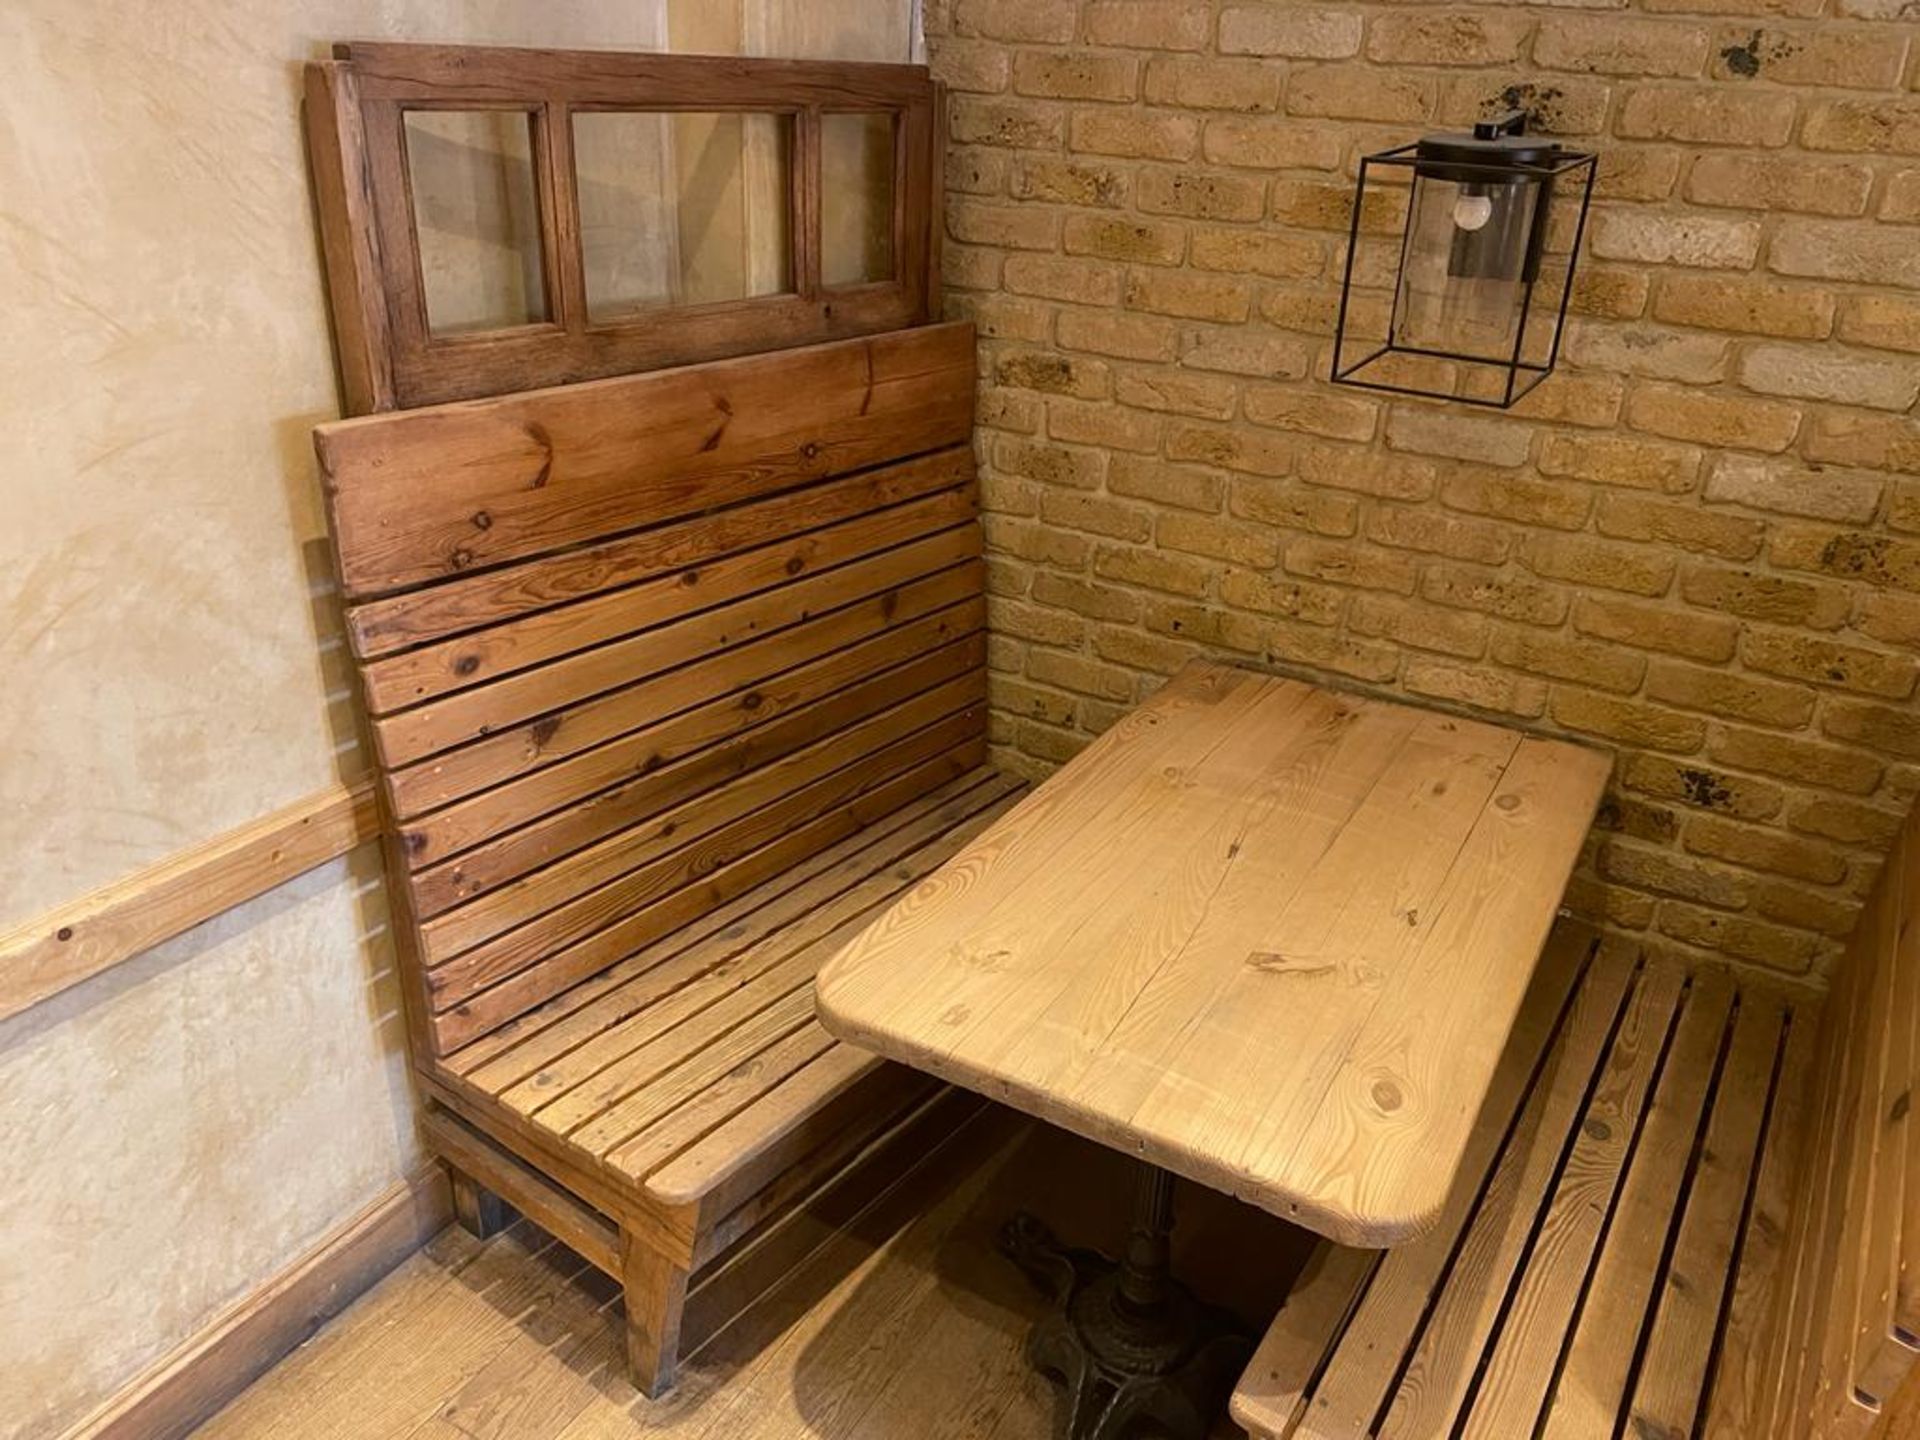 1 x Rustic Restaurant Seating Bench With Top Glass Partition - Image 2 of 8